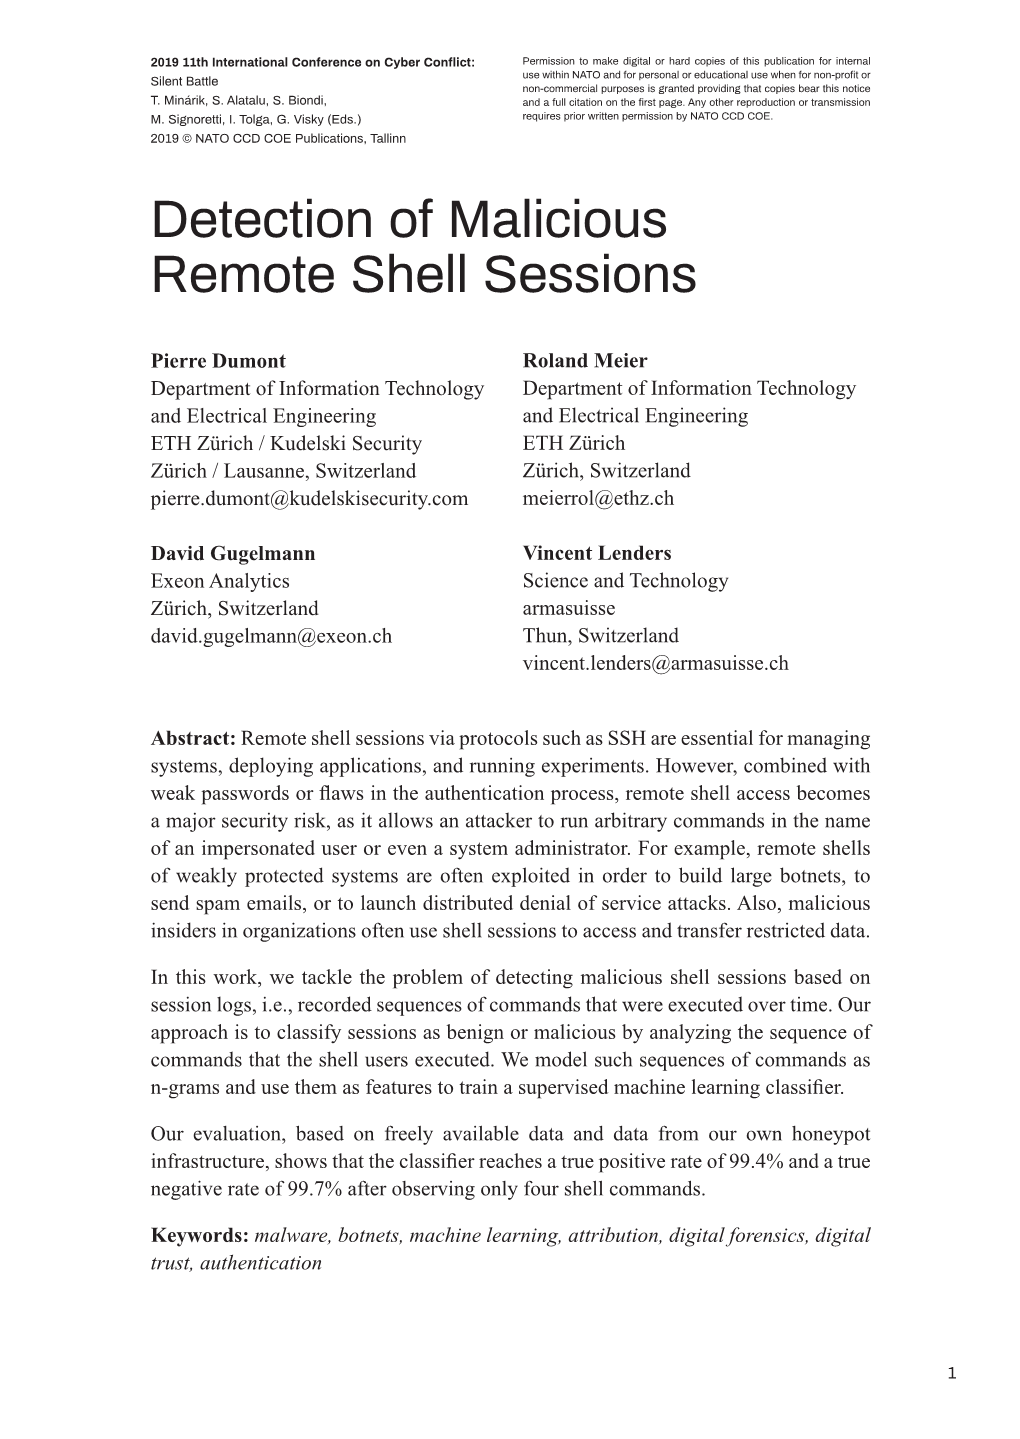 Detection of Malicious Remote Shell Sessions